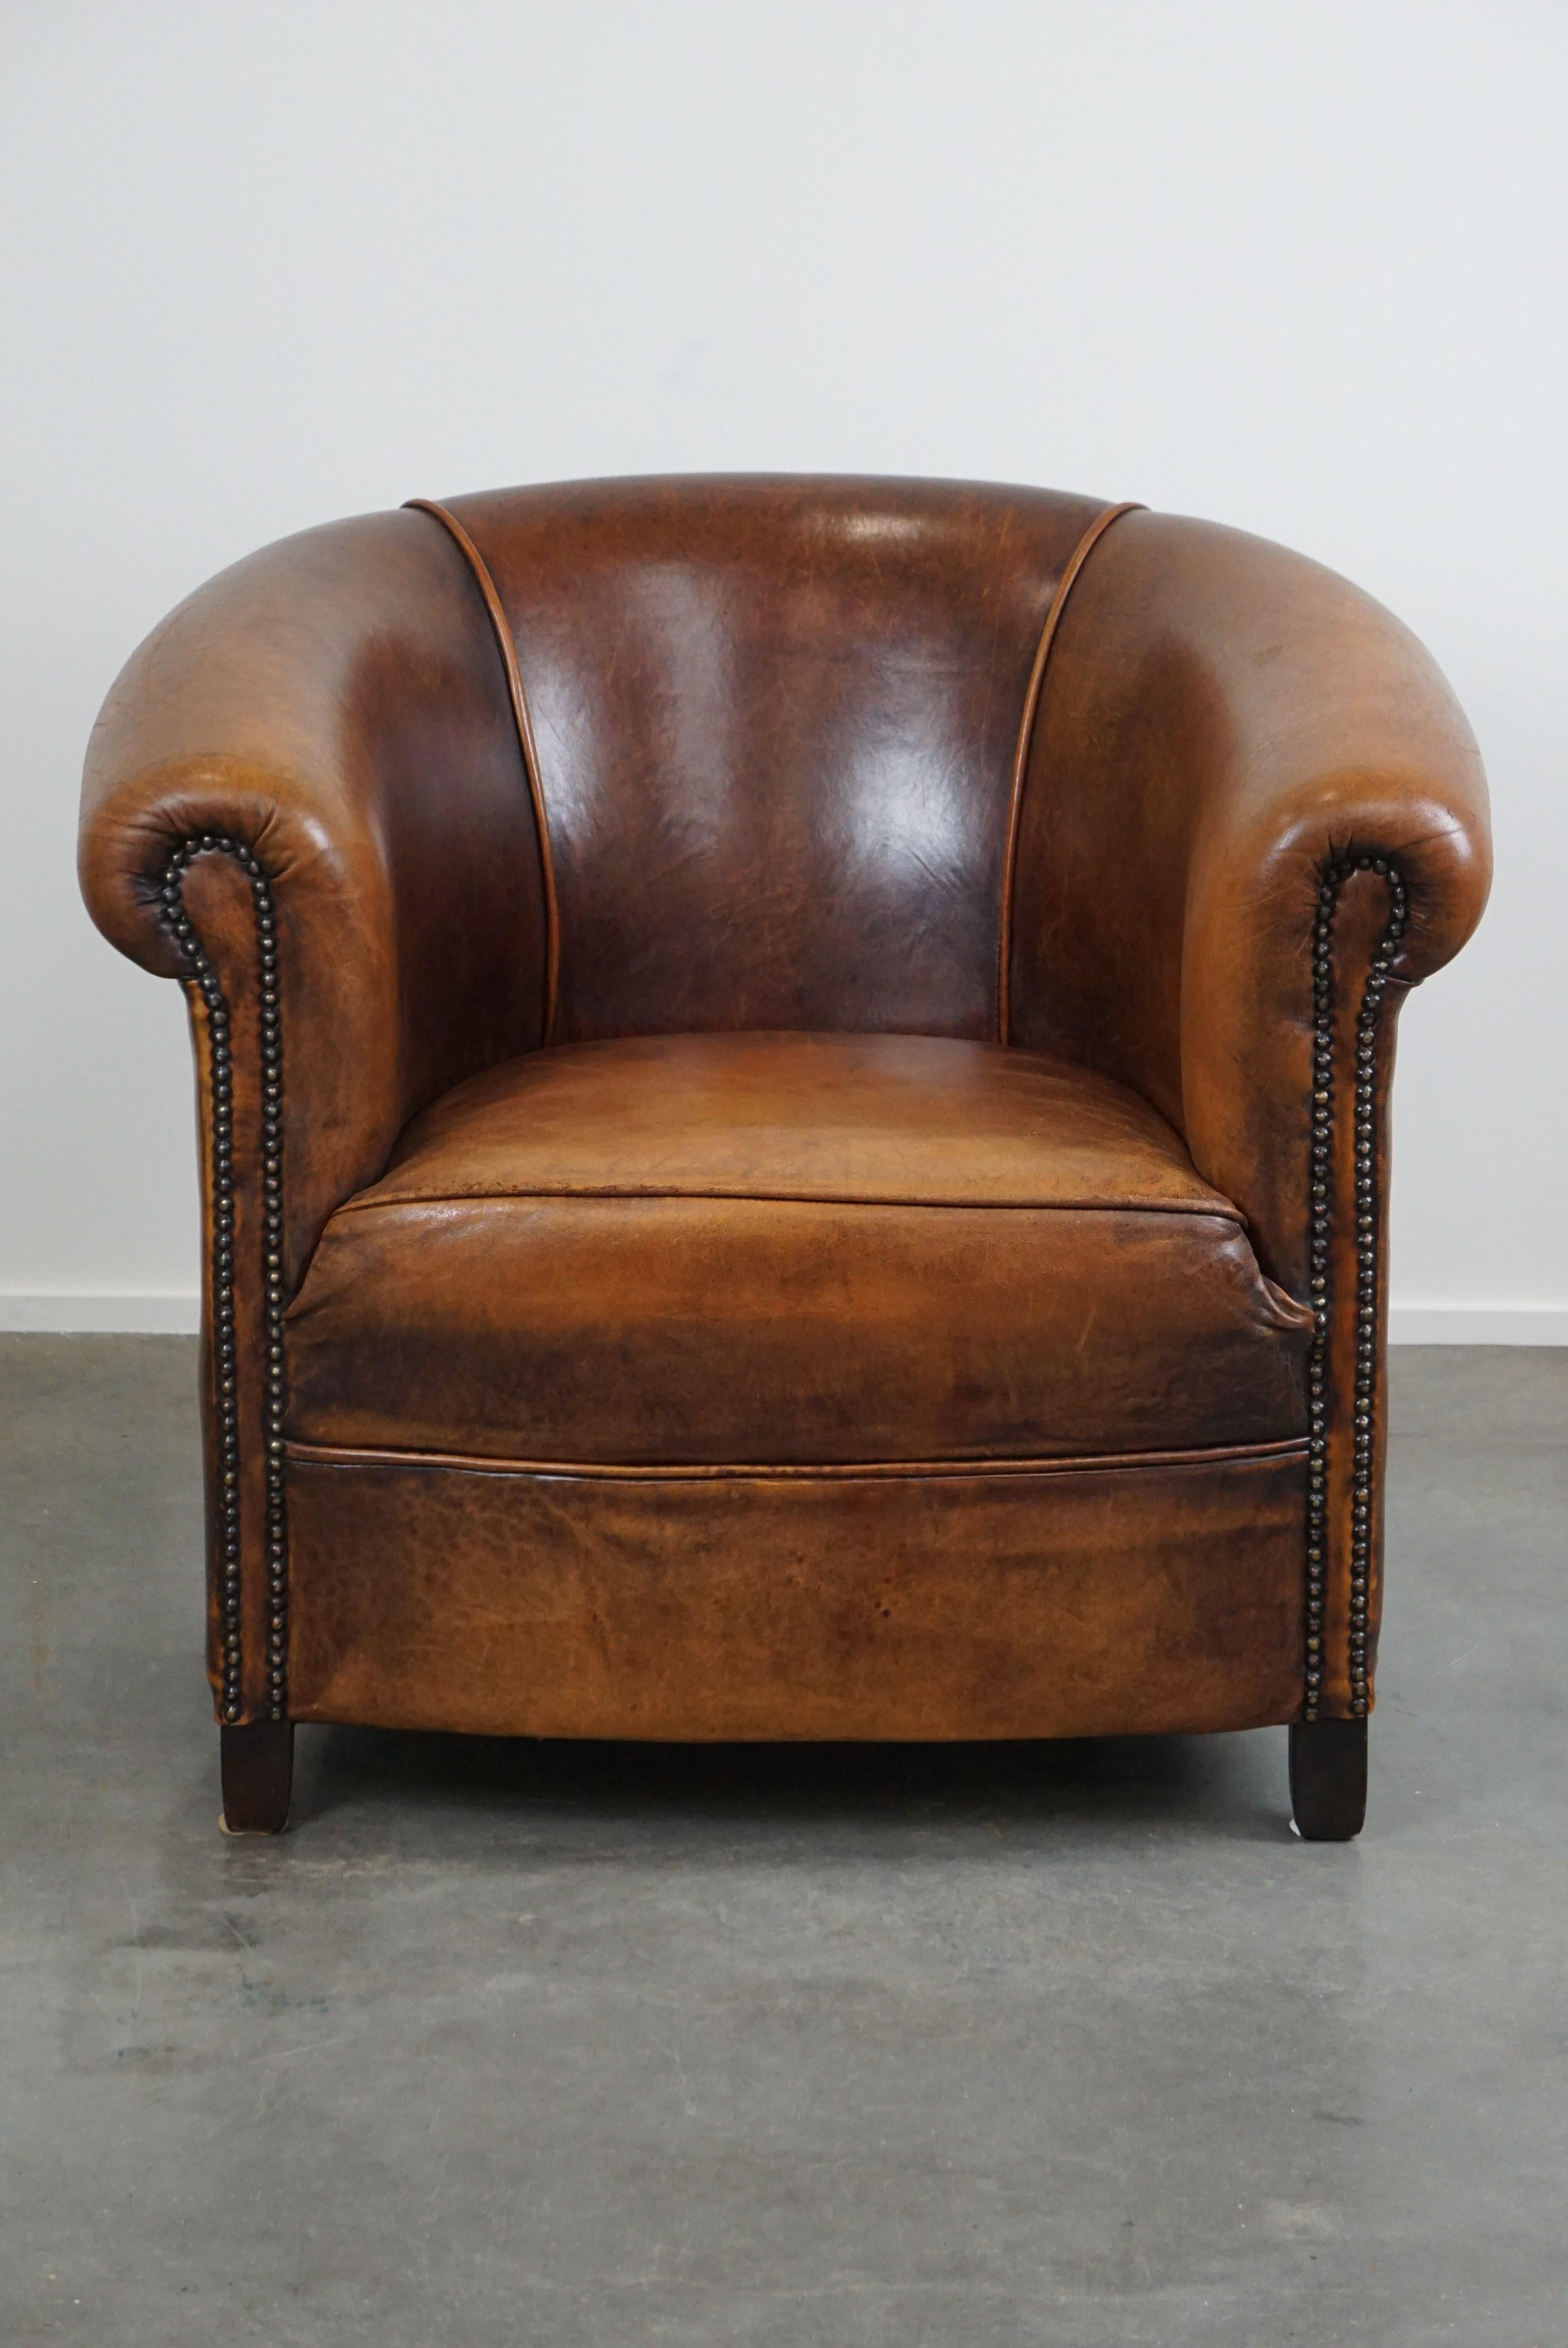 Offered: this sheep leather club armchair in good condition, modest in size, with a beautiful warm cognac color.

This lovely sheep leather club armchair is in good and properly used condition, featuring a fixed seat cushion. Its modest size makes